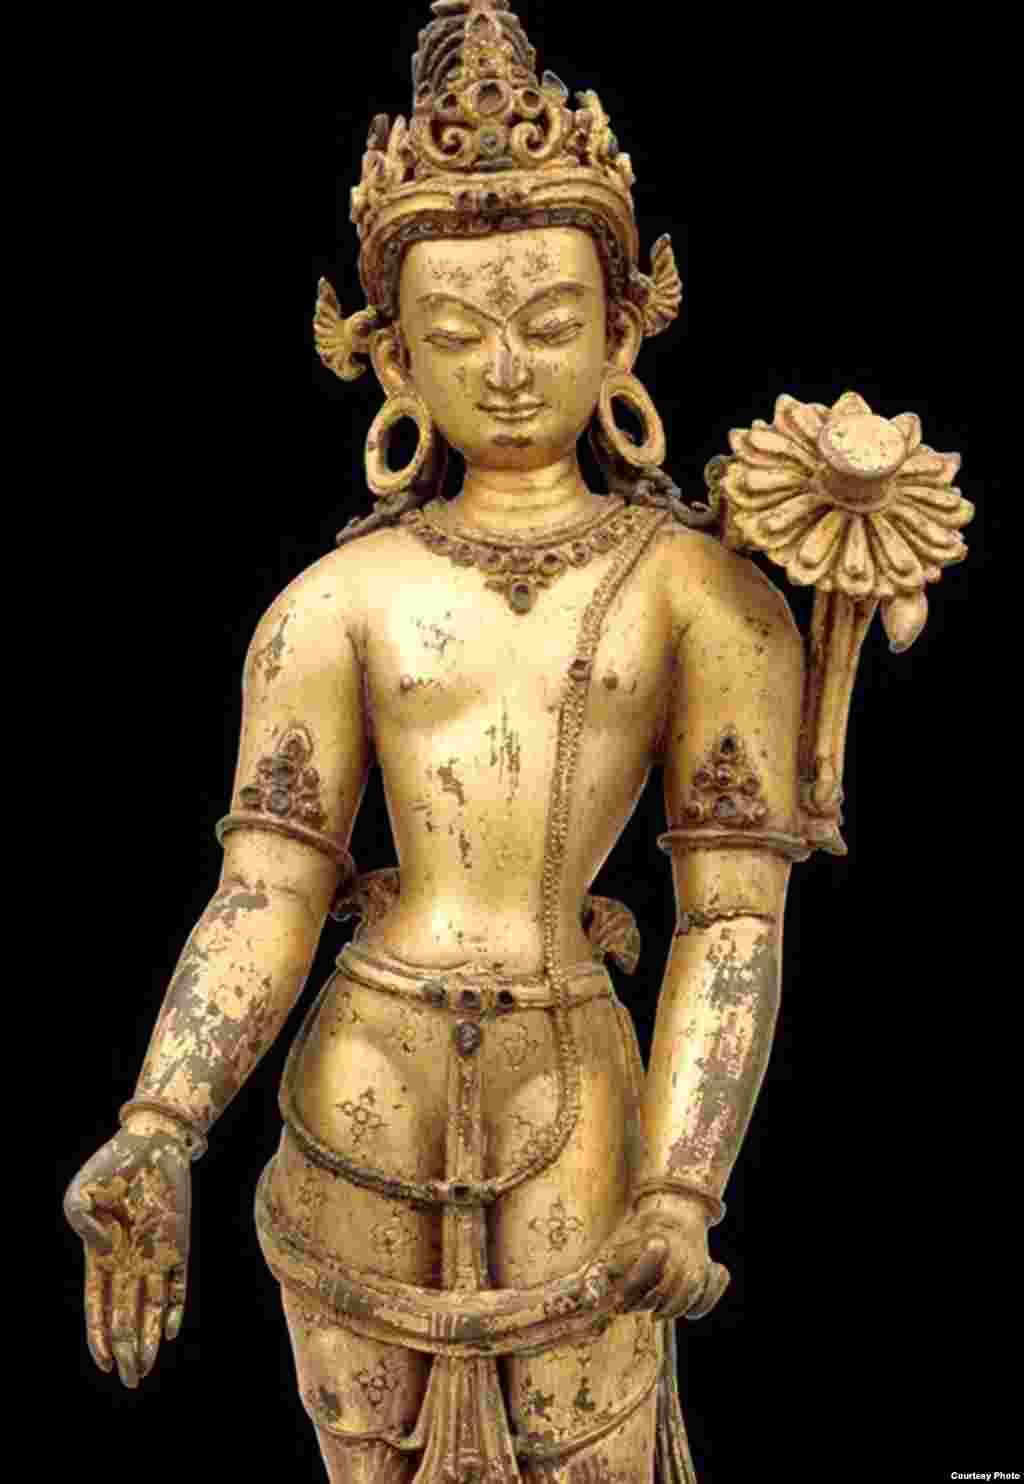 The Bodhisattva of Compassion, Avalokiteshvara, is one of the most popular deities in Nepal, where 108 forms of him are known. In his simplest form, extending his right hand in the gesture of giving and holding the stalk of a lotus (now broken) in his left hand. (Rubin Museum of Art)